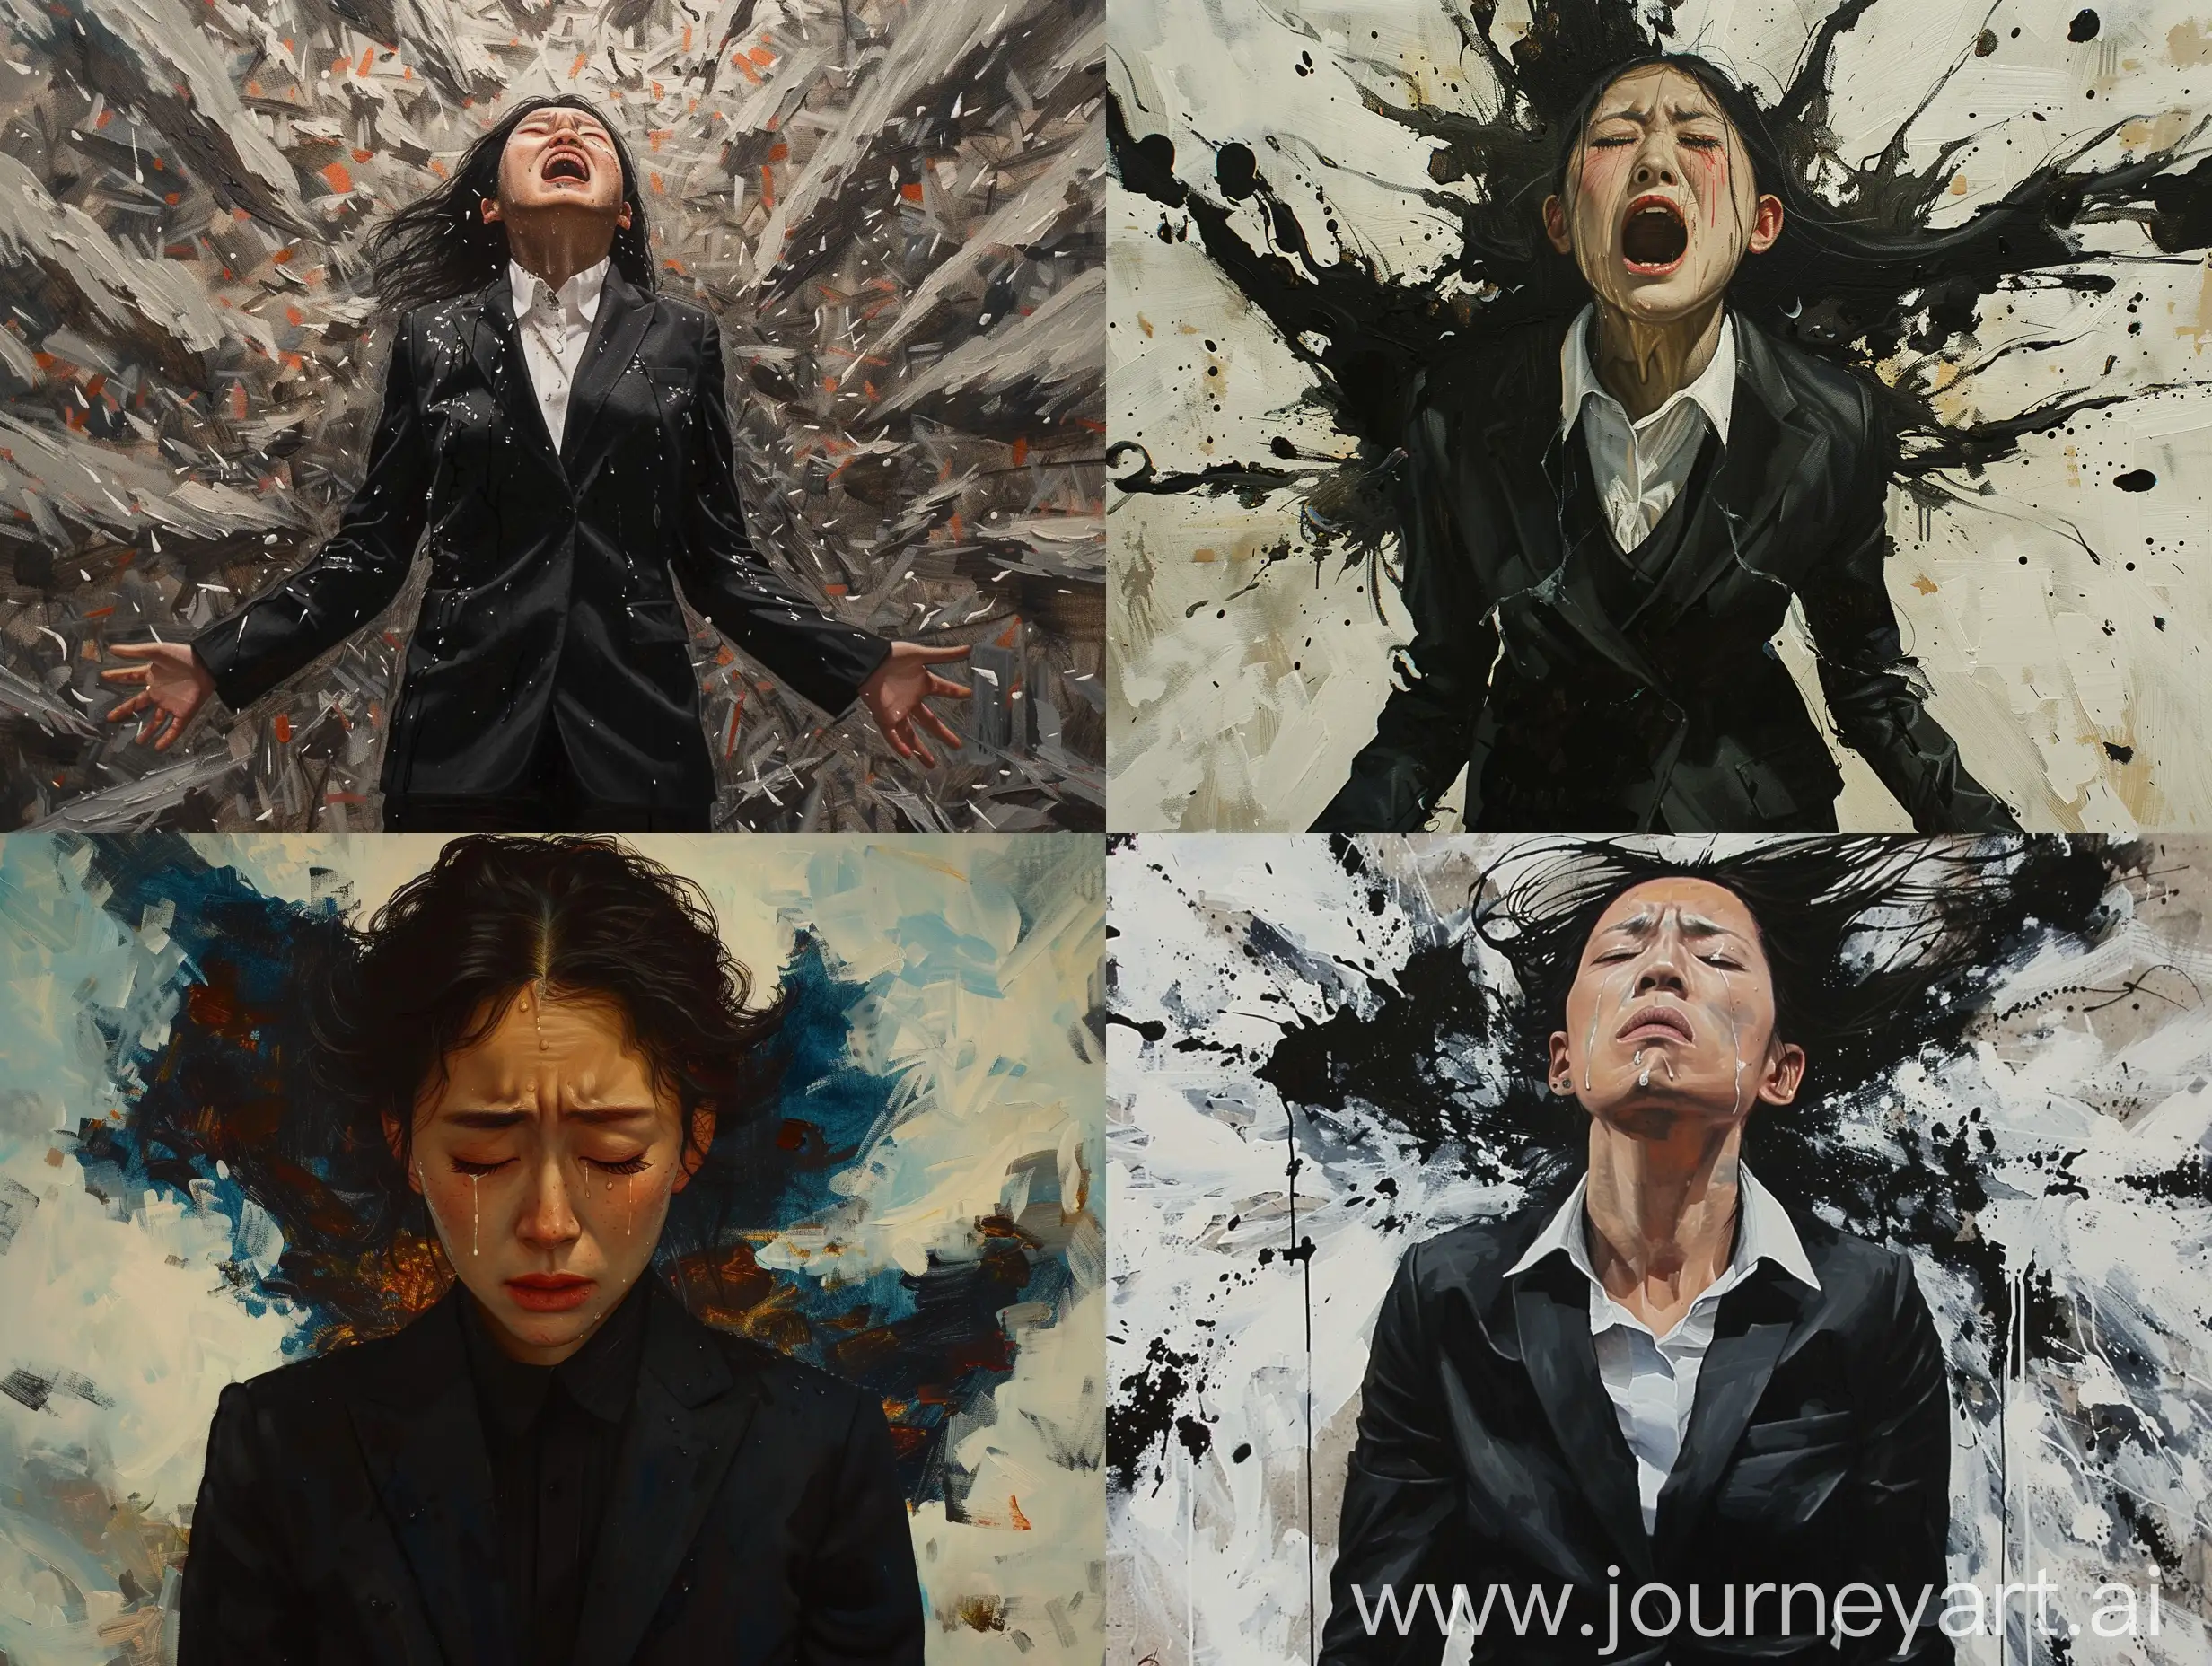 Superdetailed Ryan J Ebelt style oilpainting of the A proud Japanese woman sheds tears in a black suit, upset, twisted and gradually shattered